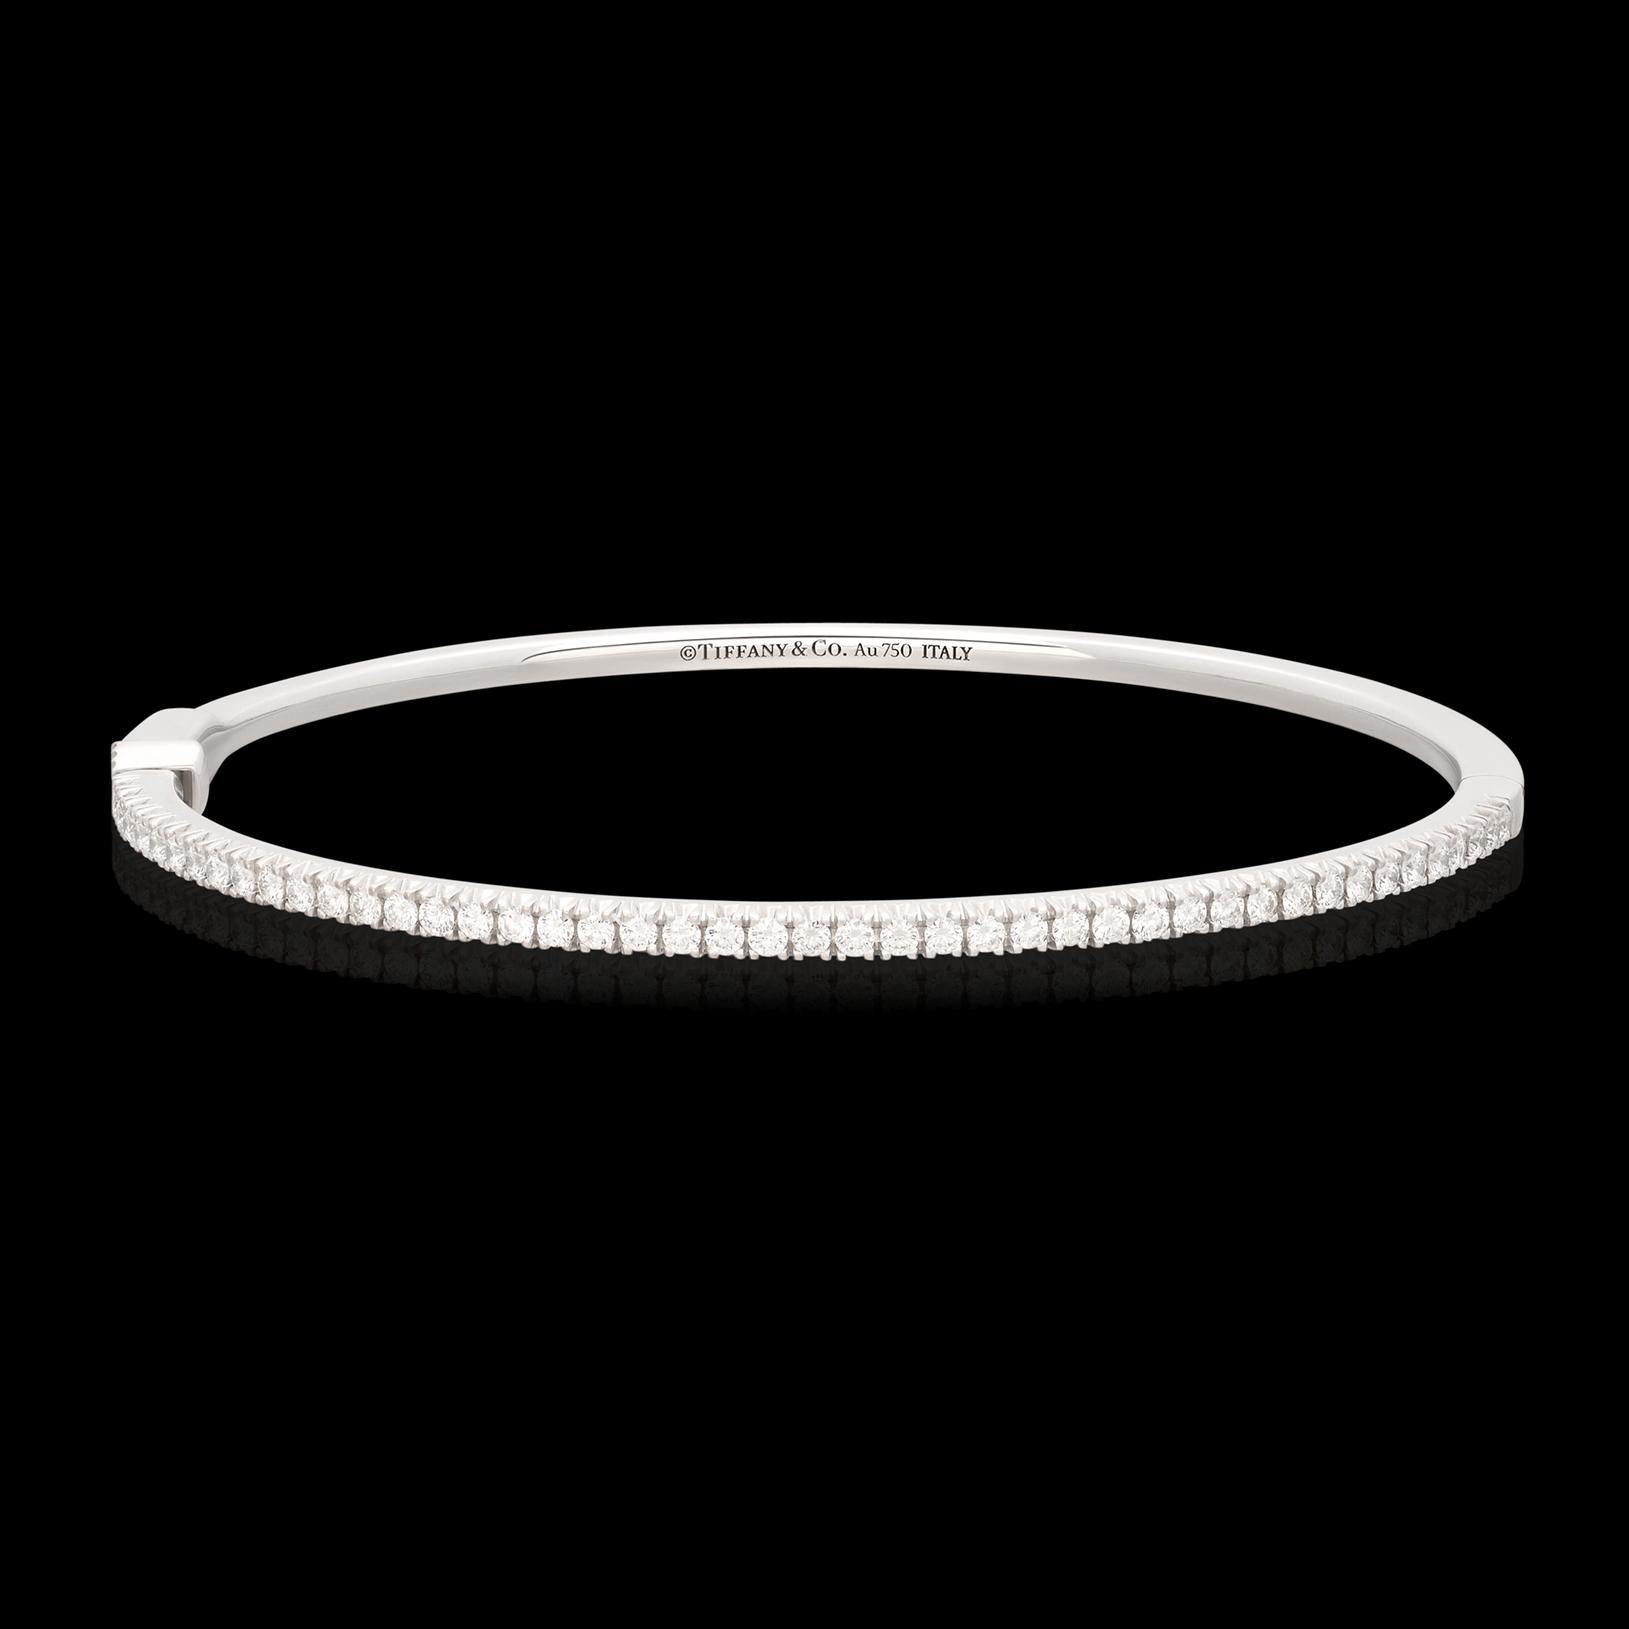 From one of the finest names in jewelry comes the Metro Diamond Bangle Bracelet by Tiffany & Co. Made with the finest quality and materials that you'd expect from Tiffany jewelry, this stunning bangle bracelet with a hook lock hinge features 45